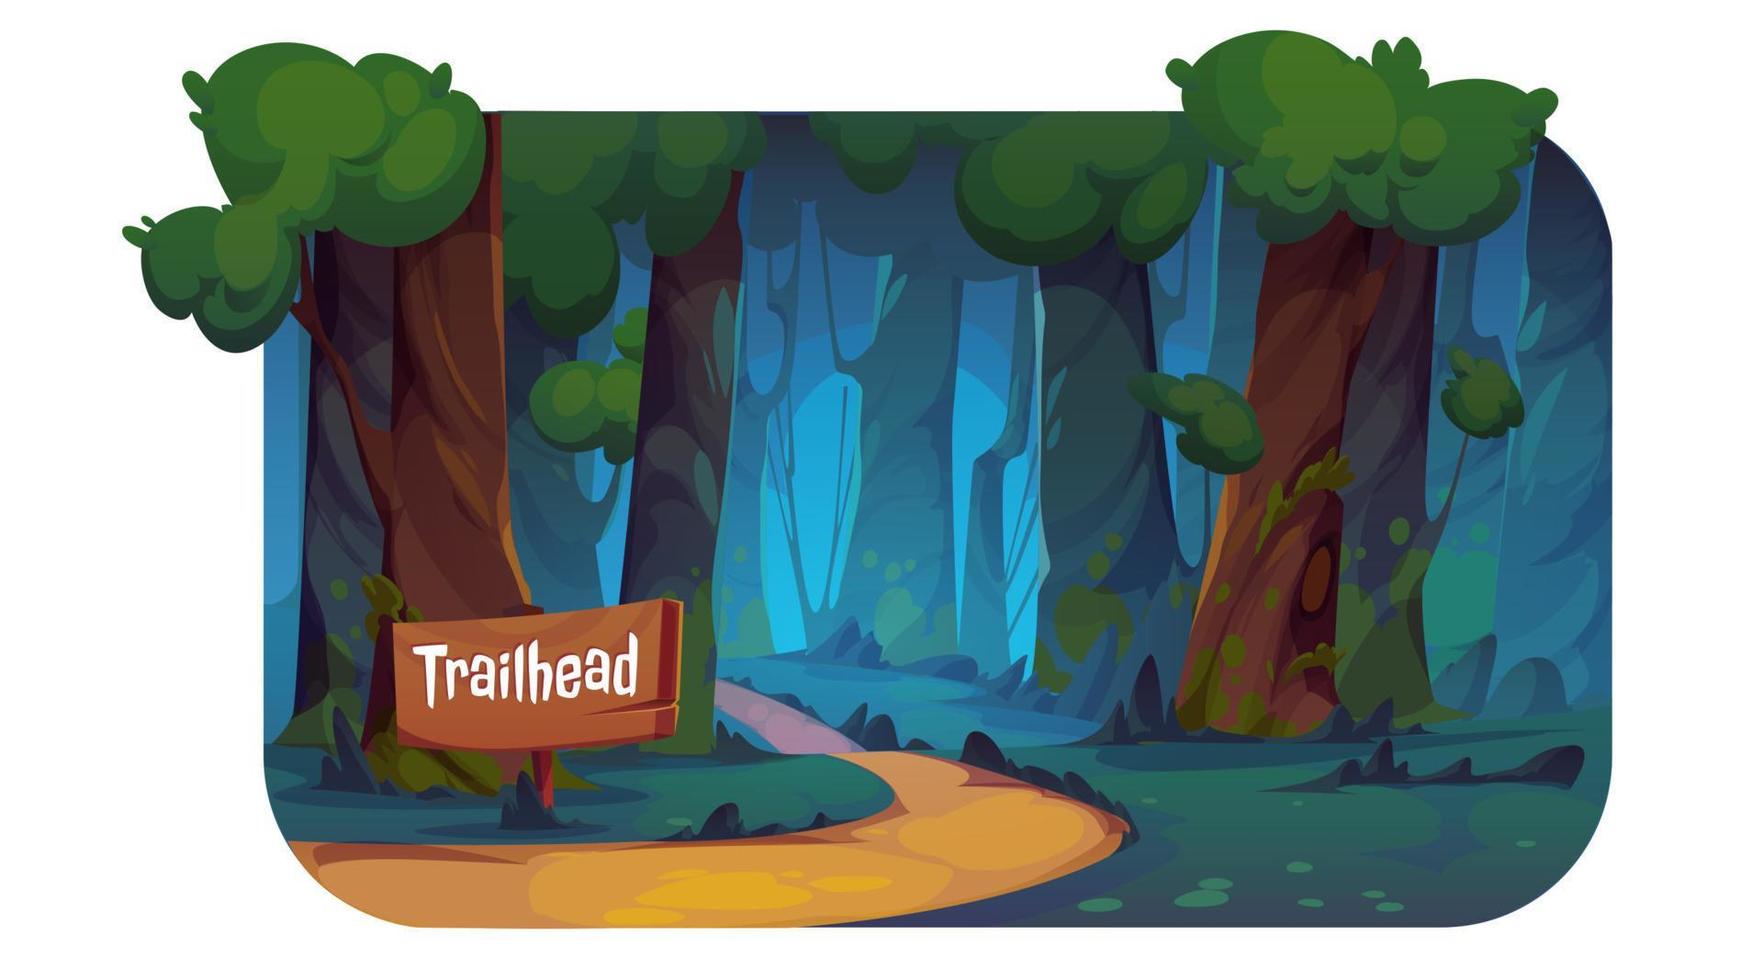 Cartoon forest trail with wooden trailhead sign vector